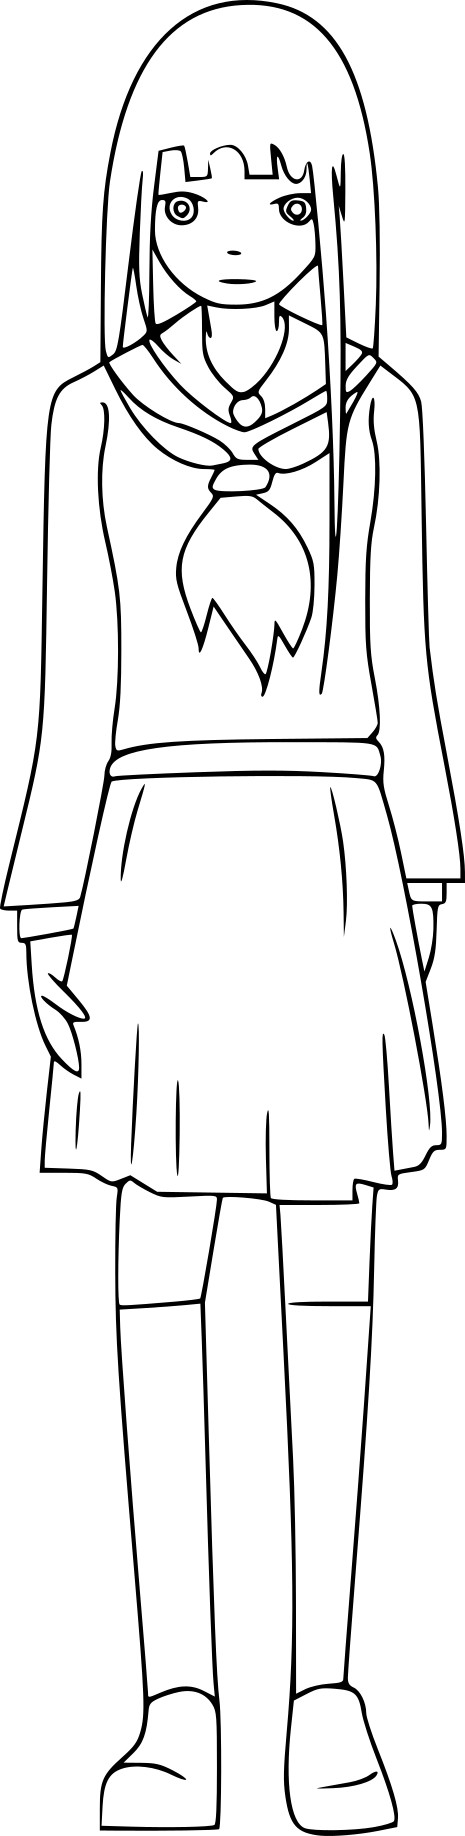 Ai Enma The Daughter Of The Underworld coloring page